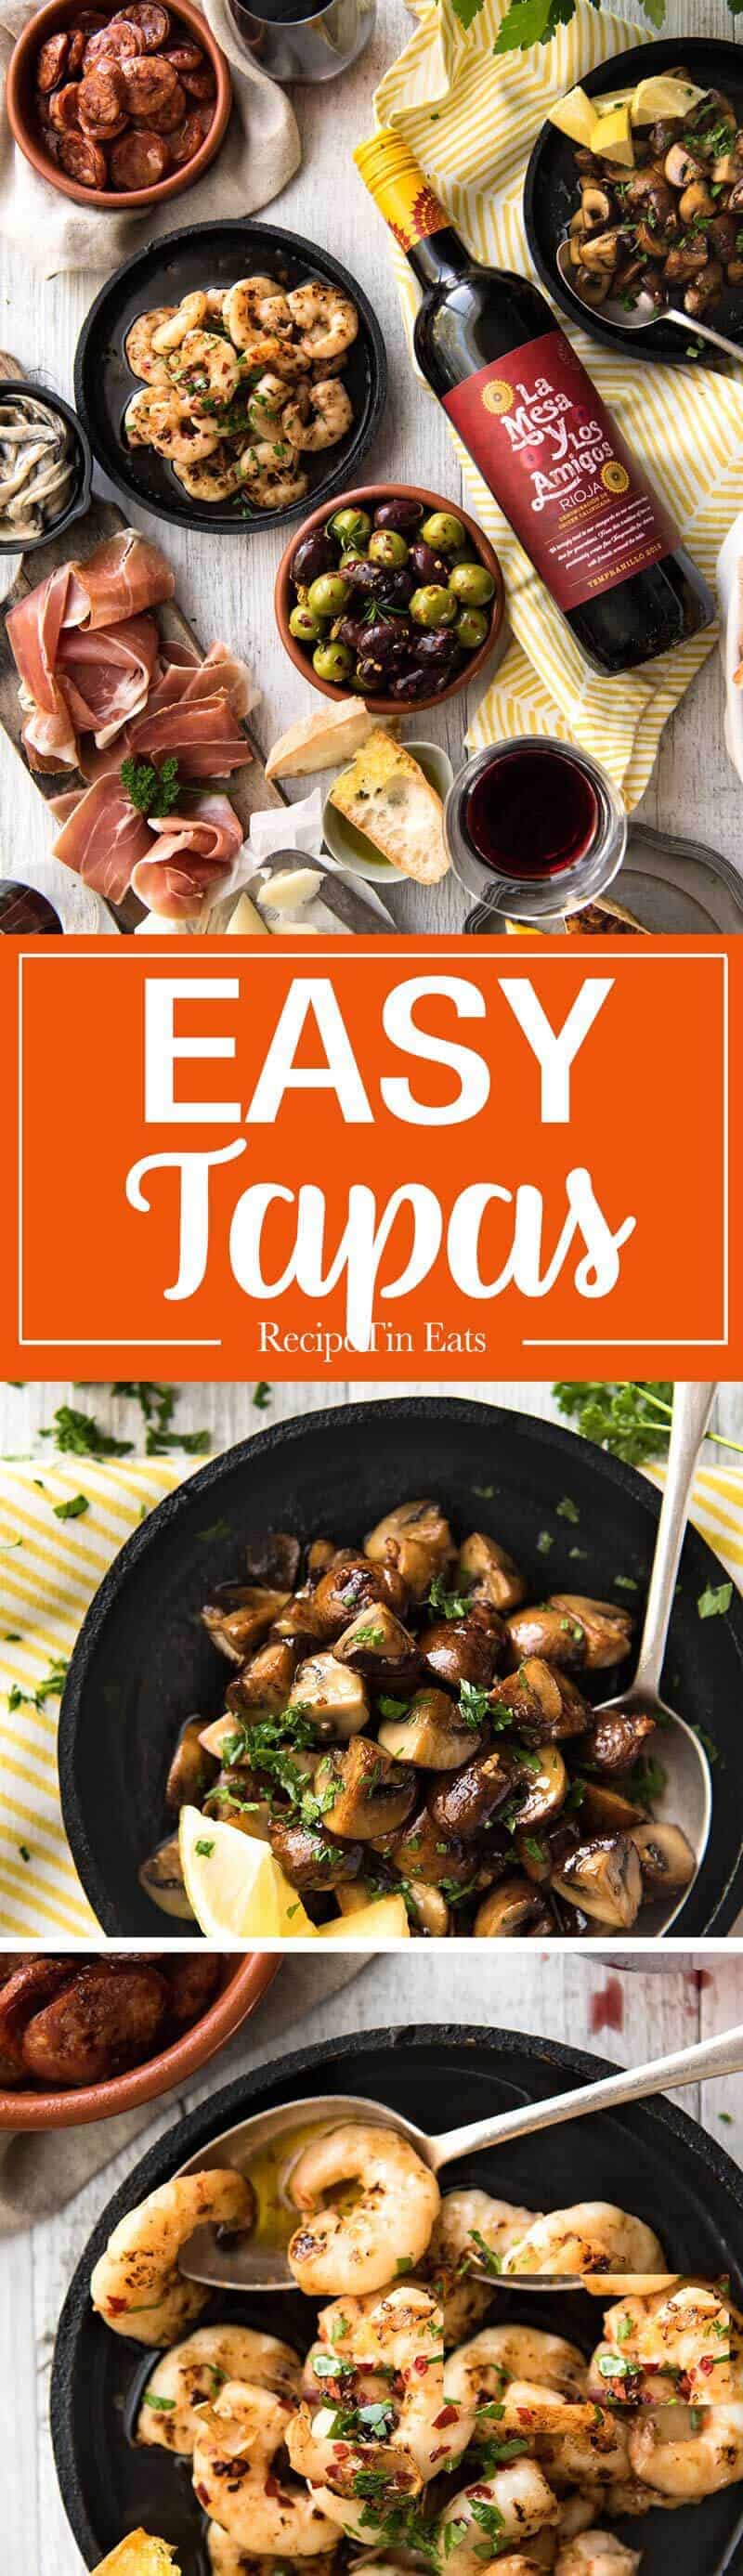 5 Easy Spanish Tapas recipes - all your favorites from the tapas bar! Garlic mushrooms, chorizo, garlic shrimp/prawns, Spanish marinated olives , Spanish omelette and a cheese platter! www.recipetineats.com